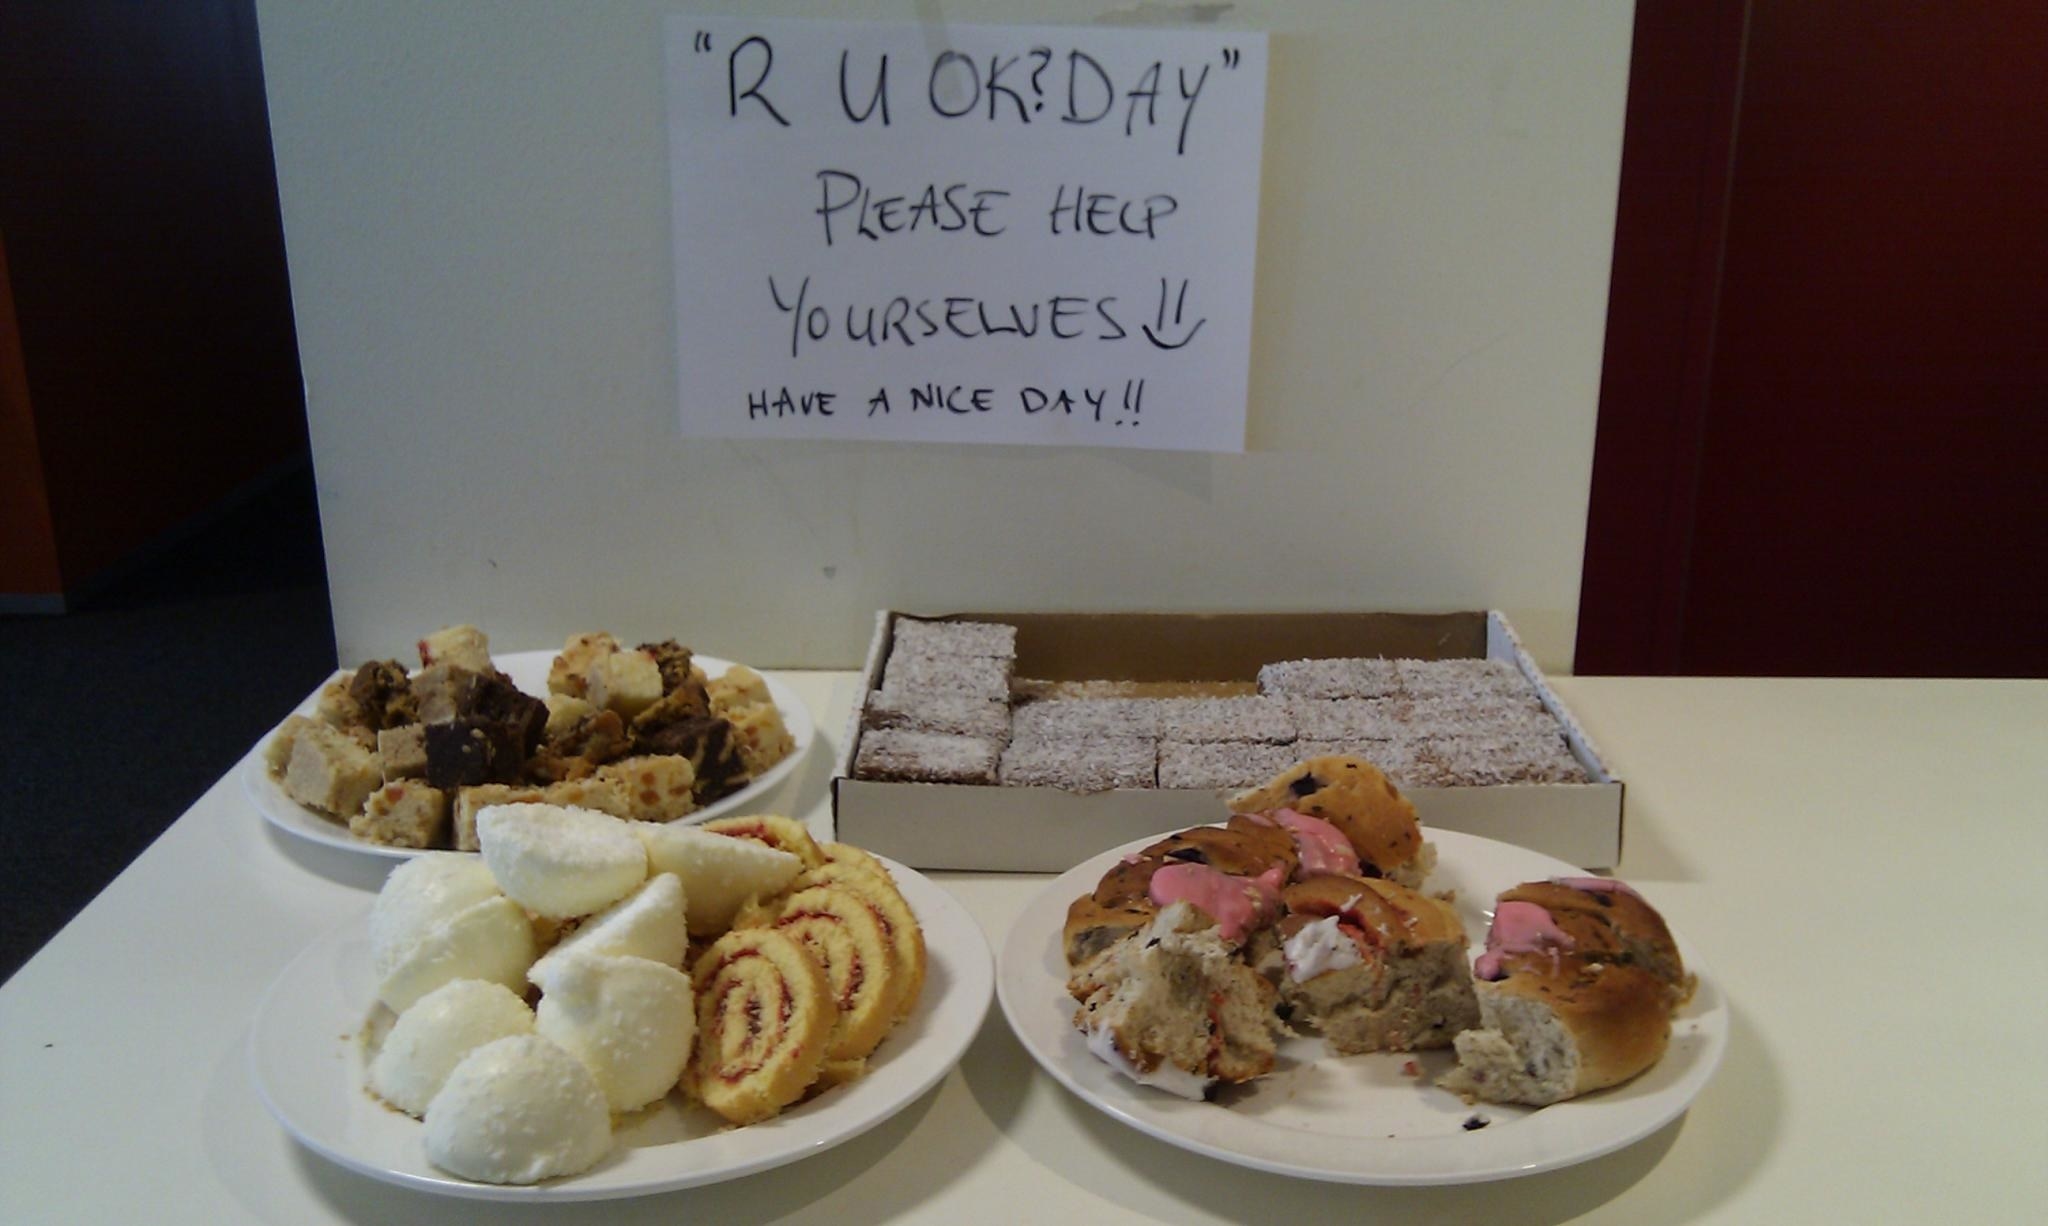 A table laid out with baked goods; there is a sign saying &quot;R U OK day, please help yourselves! Have a nice day&quot;